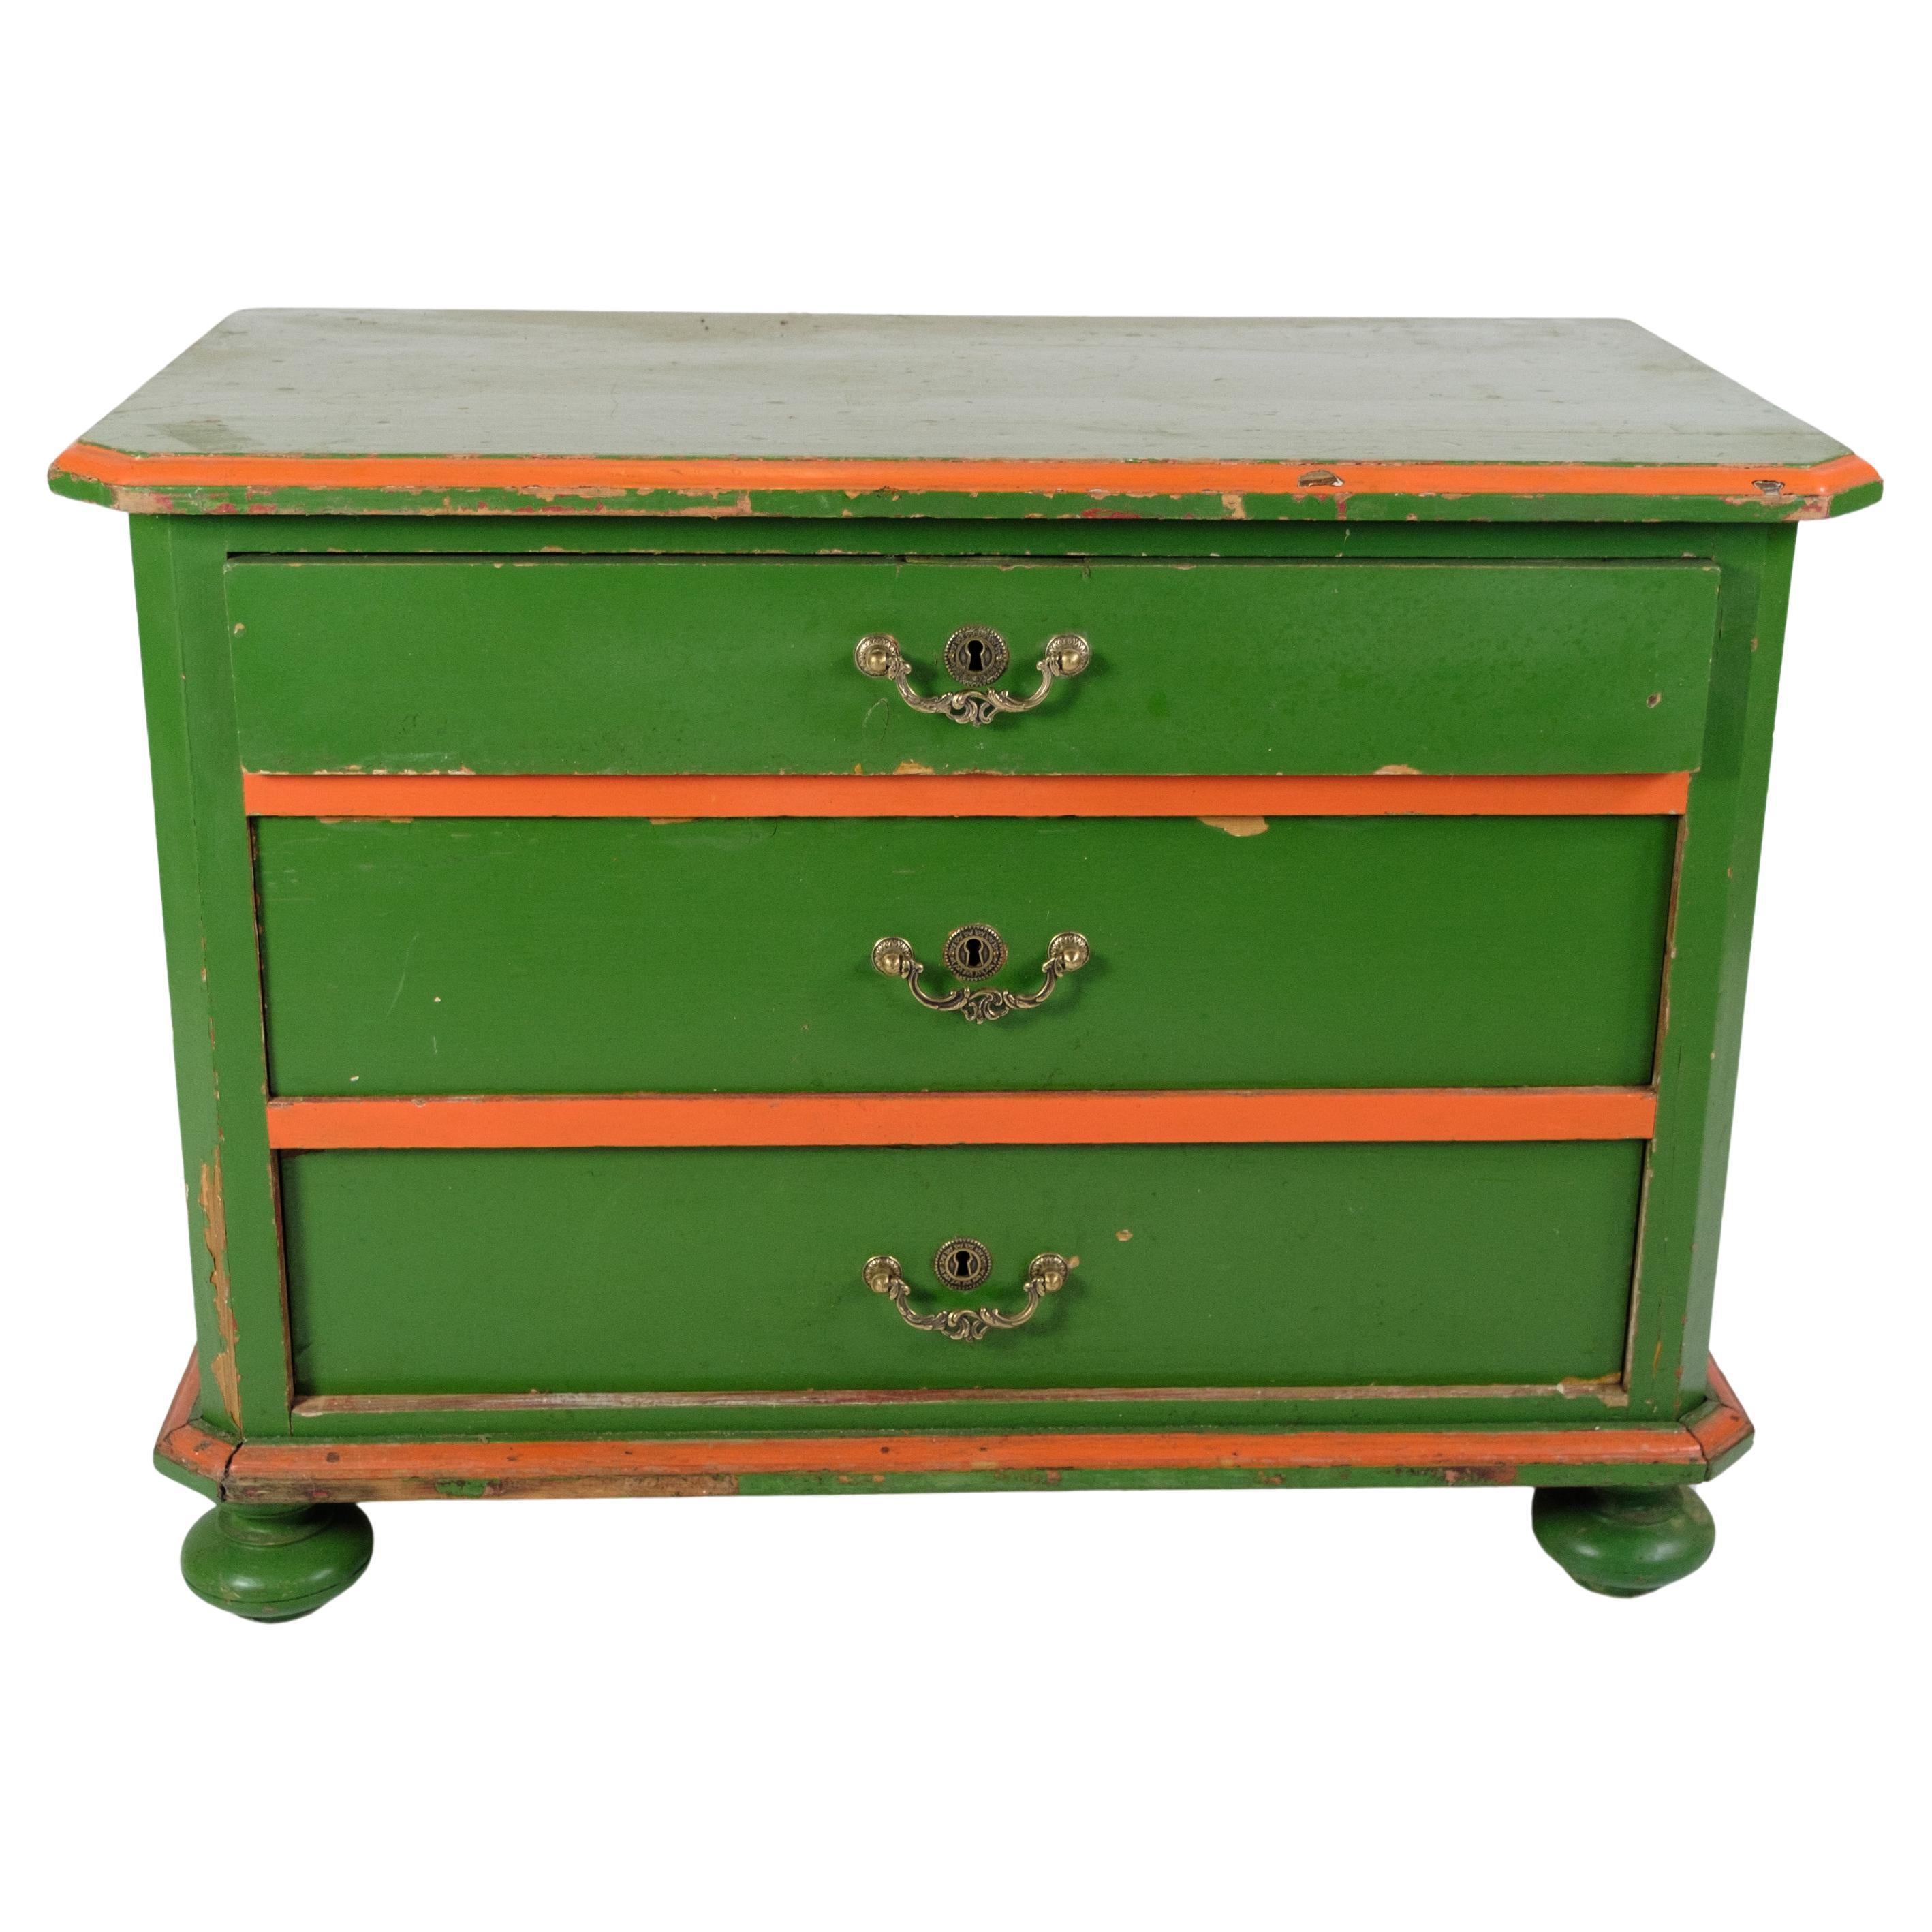 Small Antique Chest Of Drawers Painted In Green With Red Edges From 1890s For Sale